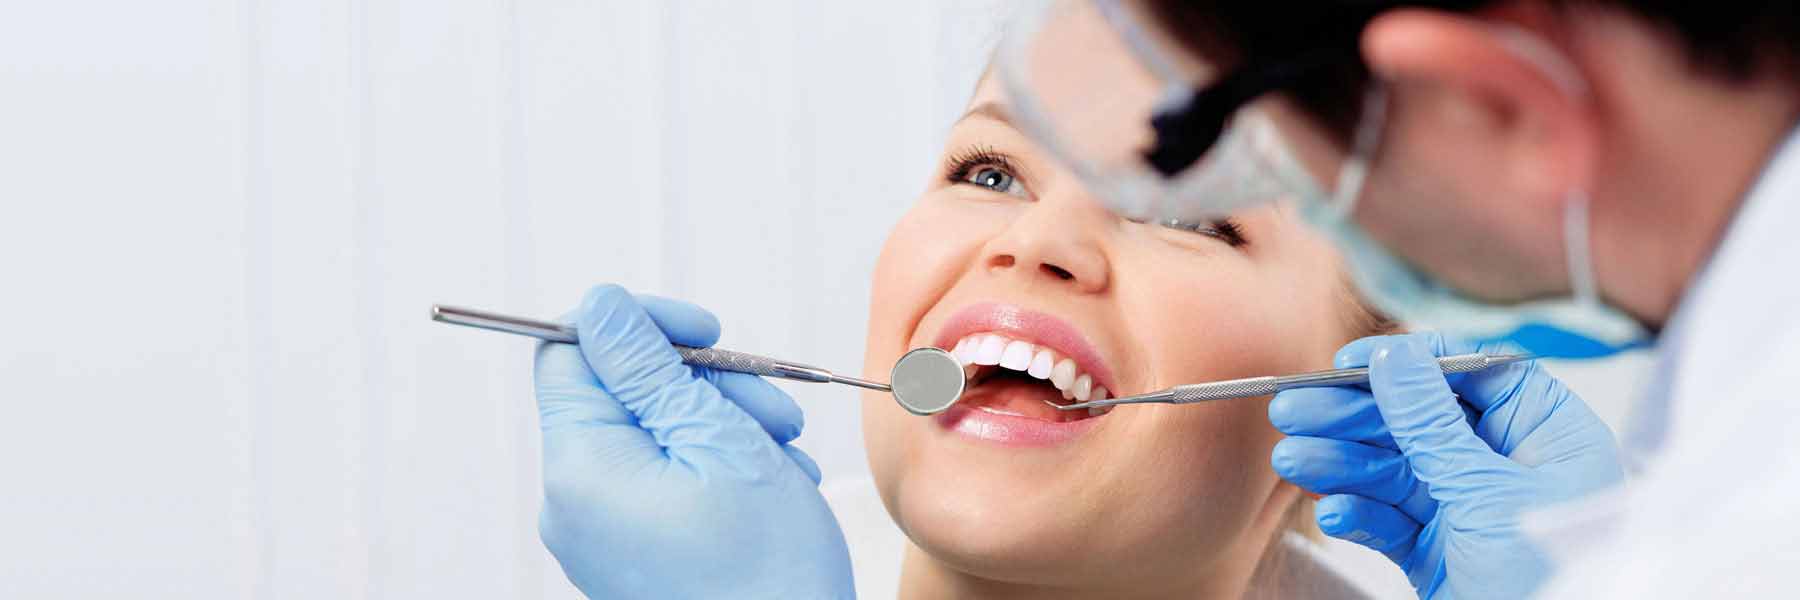 Dental Service in Rutherford - Tooth N Care